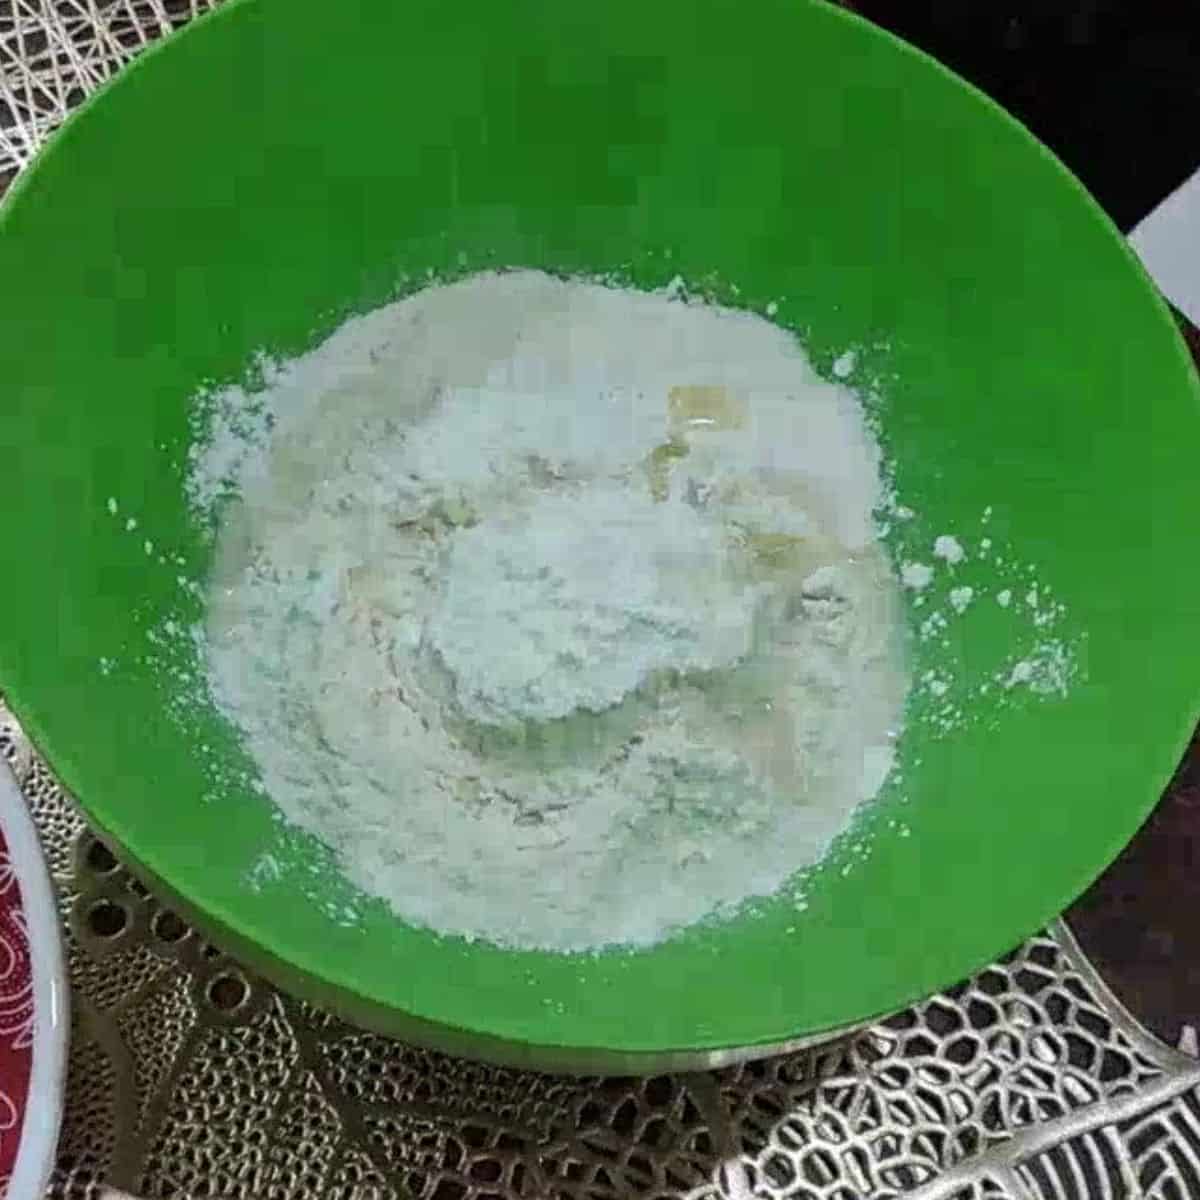 steps to make keema naan dough or Minced filled bread dough at home